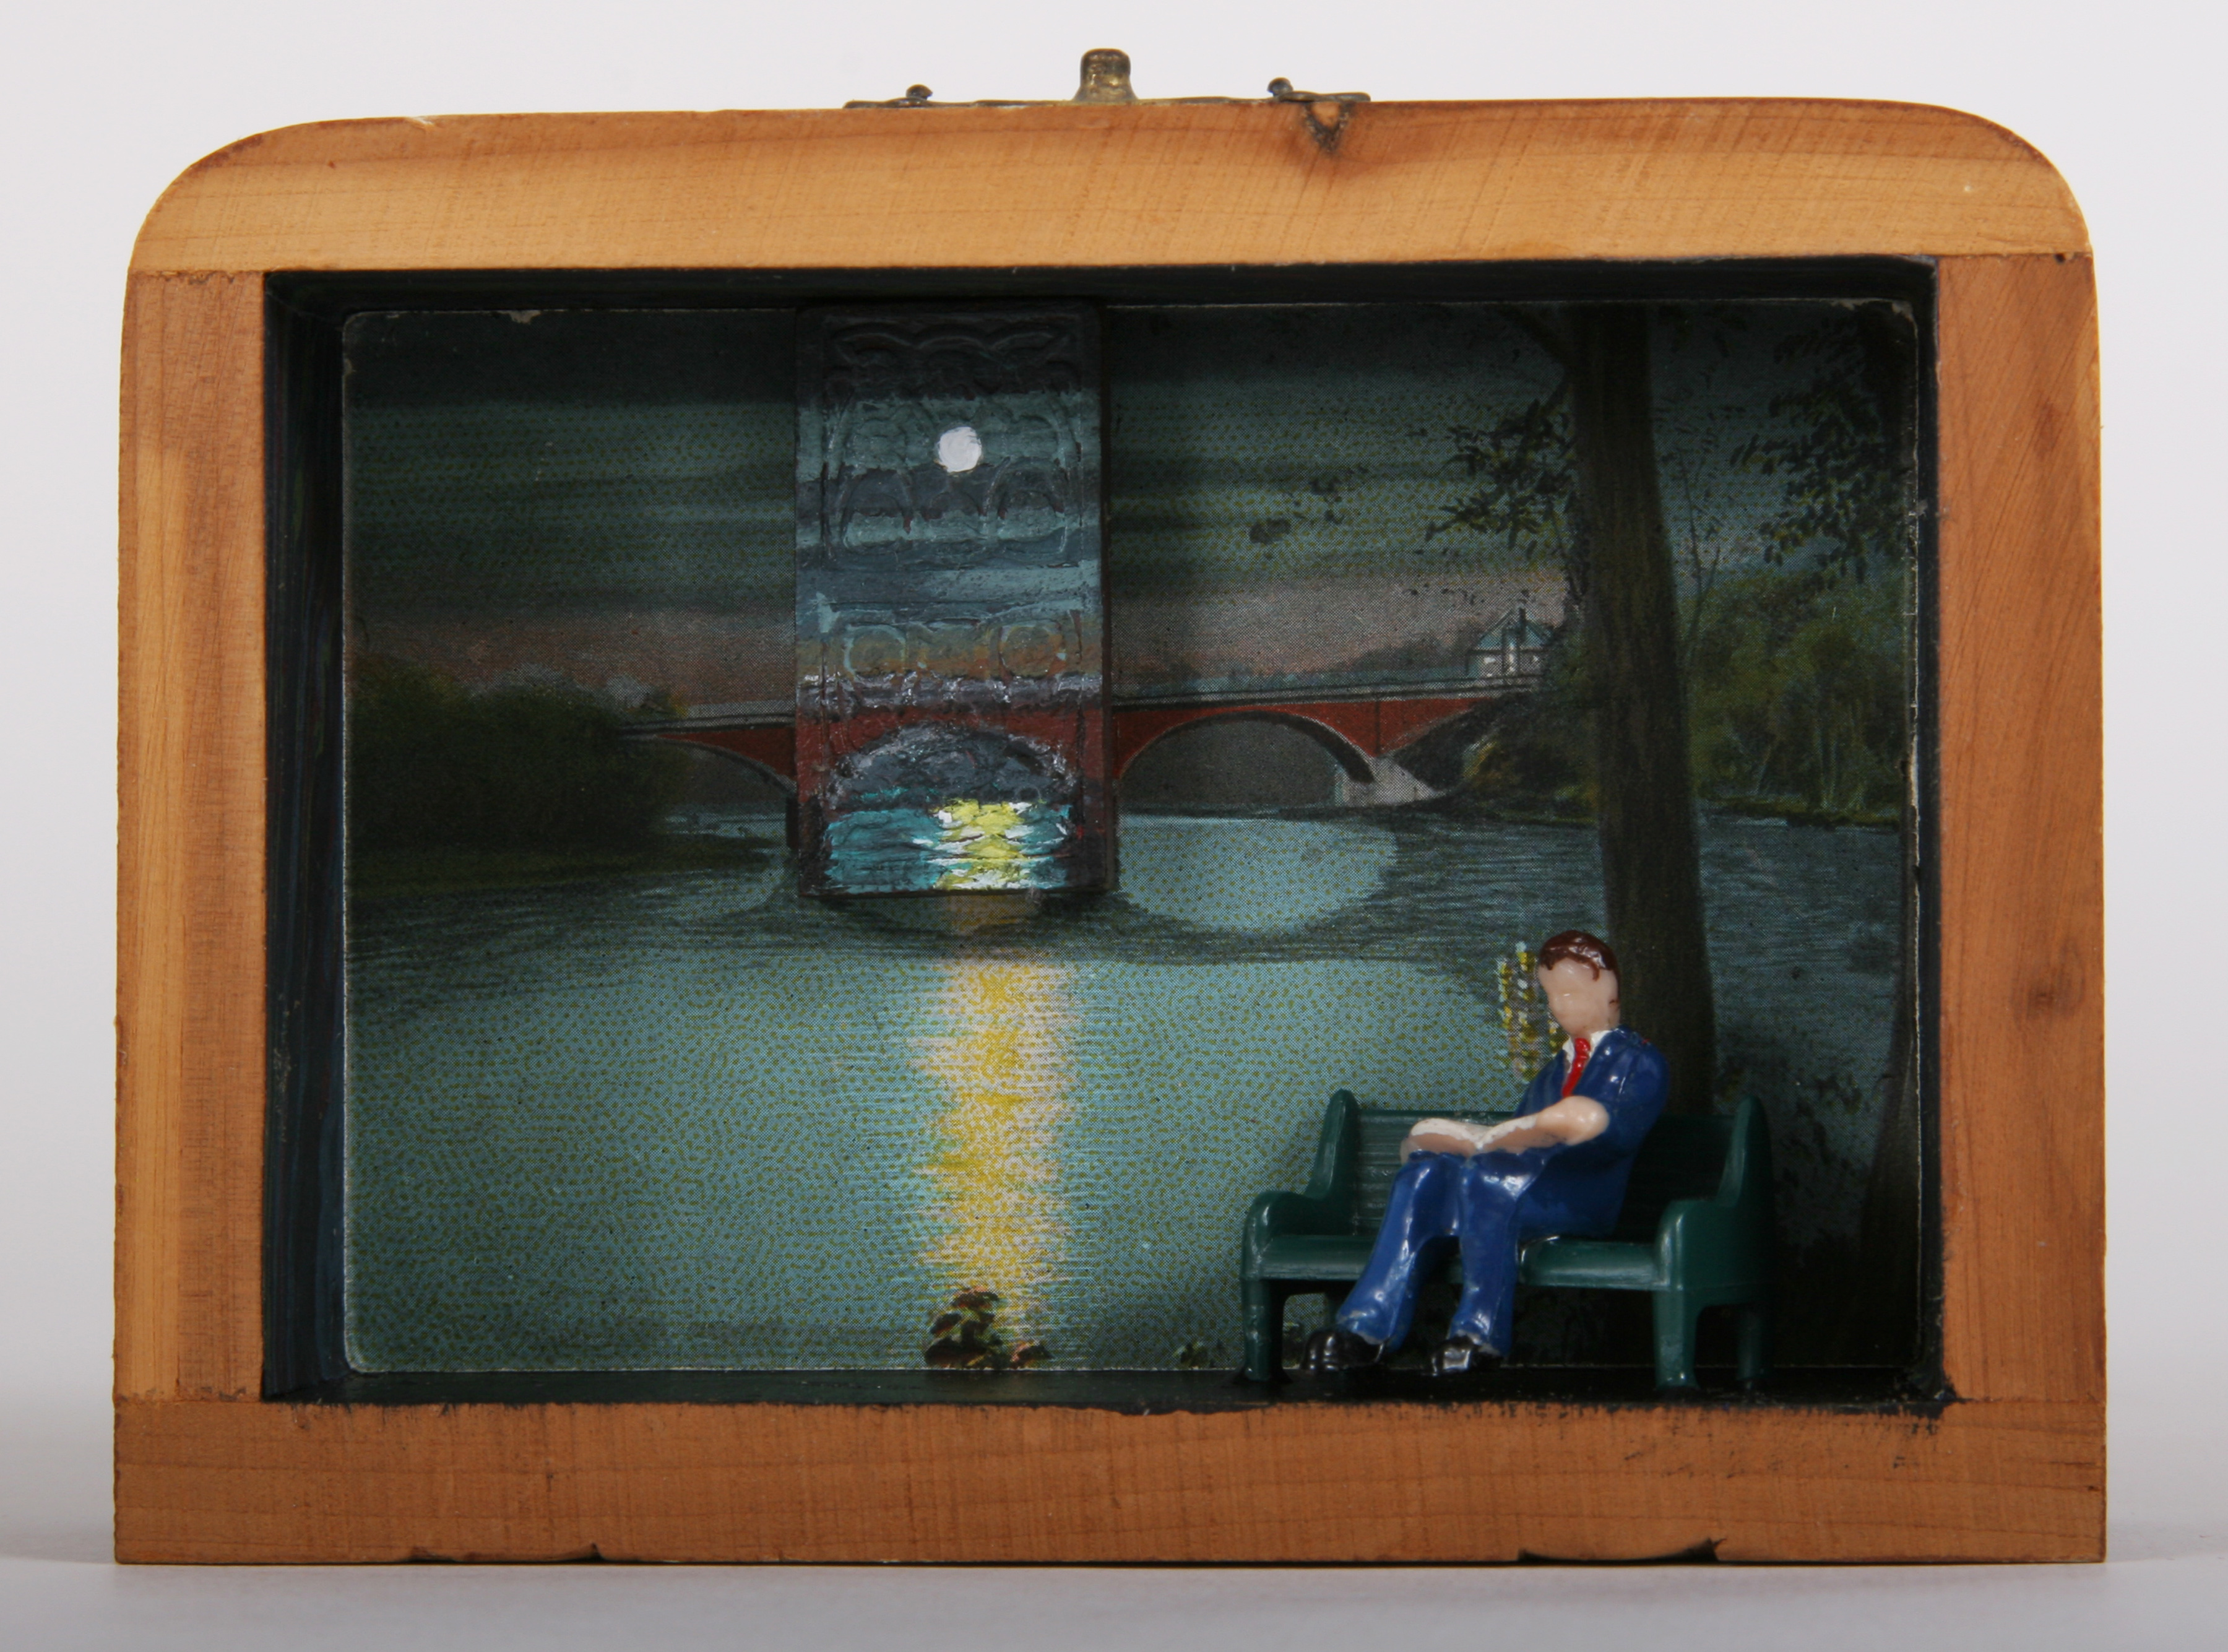     \"Moonlight Scene #14: Reading on Bench\"
    mixed-media assemblage
    5 x 3.5 x 1.5
    2009

    SOLD

    Assemblage in old wood cedar souvenier box with acrylic on vintage wood domino, vintage postcard, plastic figure & bench, paper